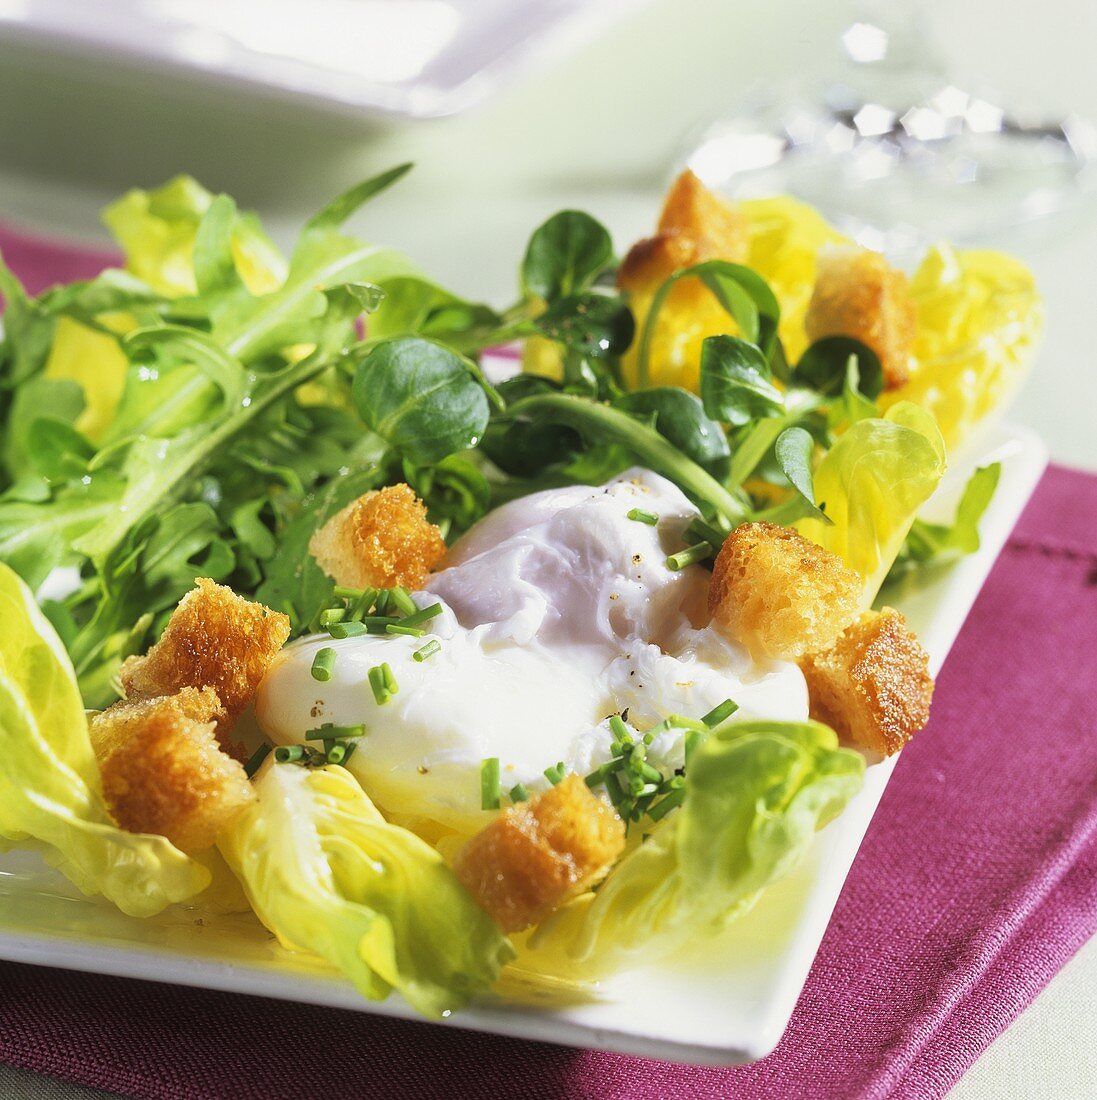 Salad with poached egg and bread